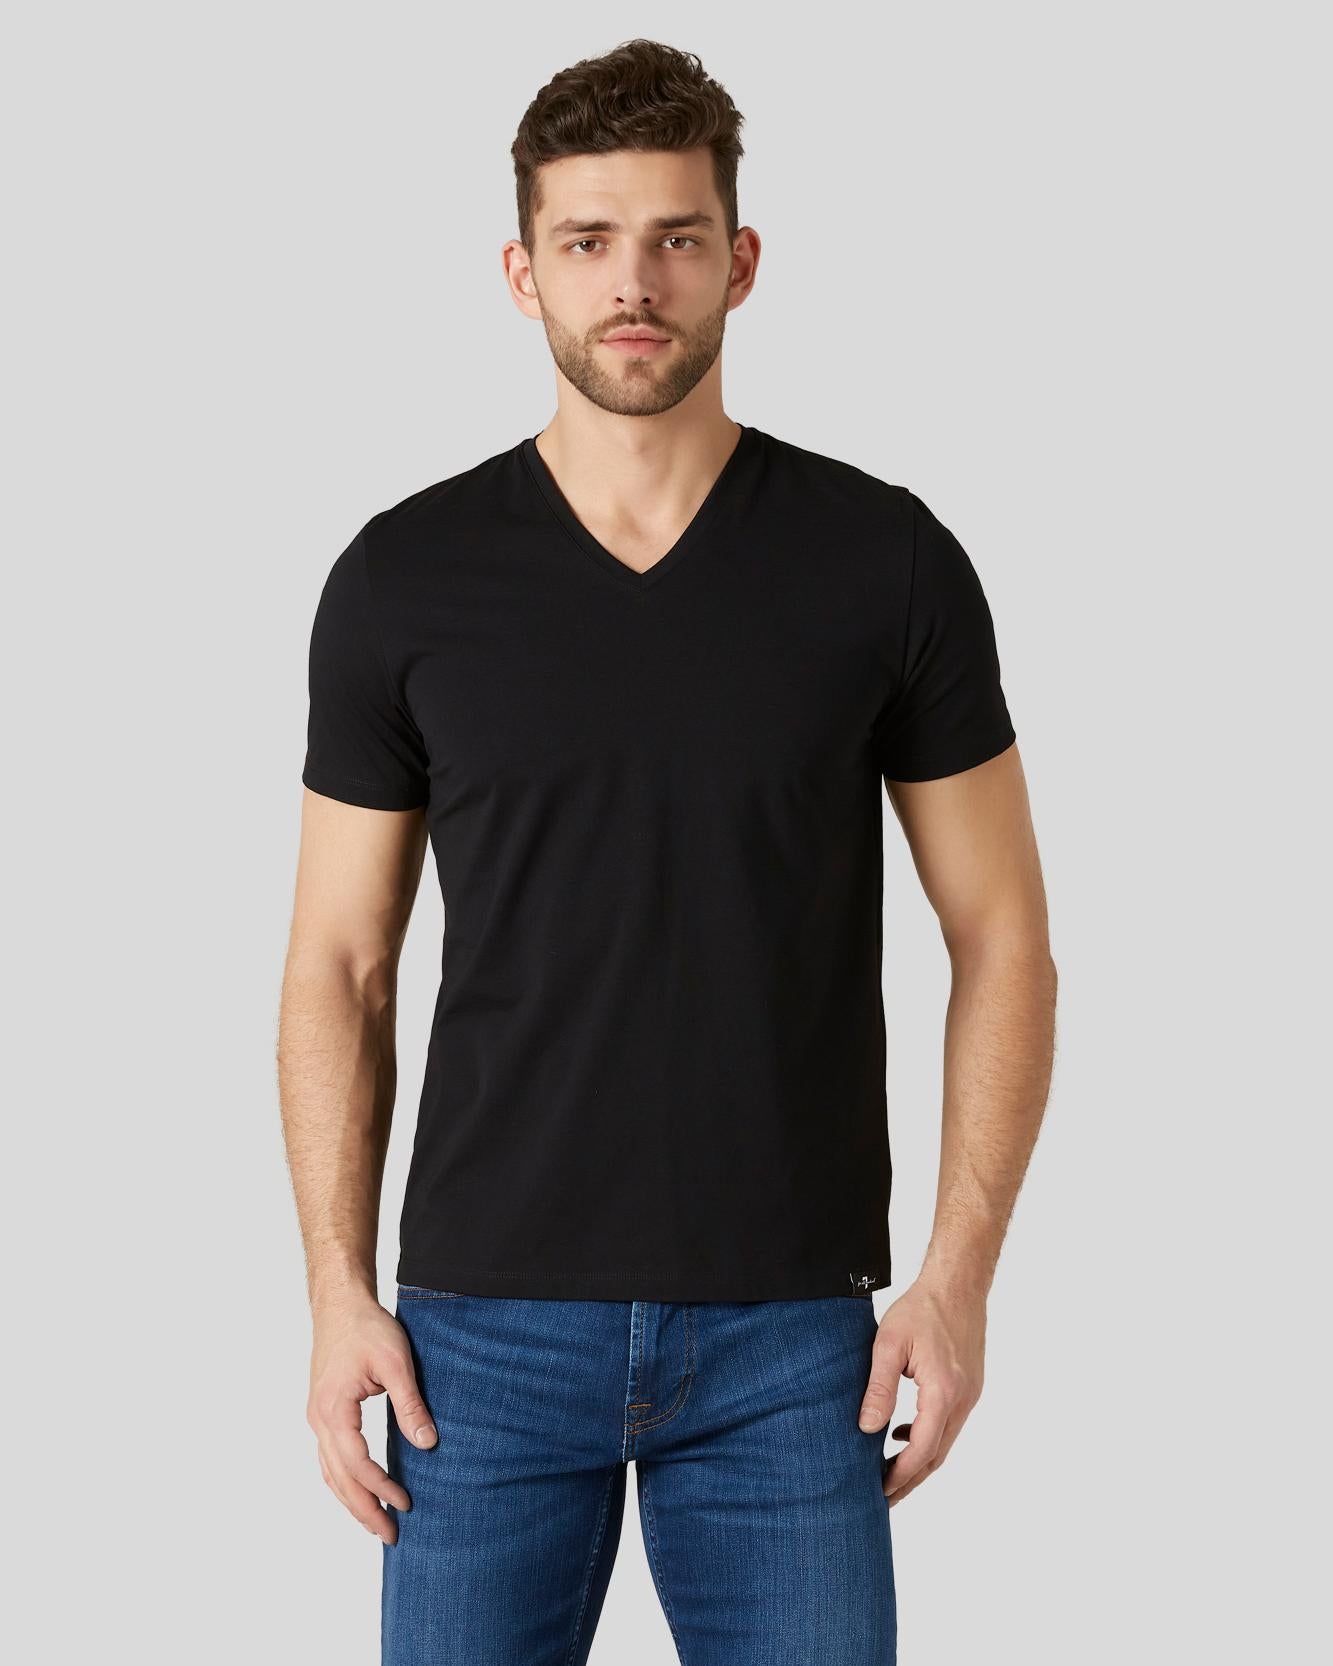 Luxe Performance V-Neck Tee in Black